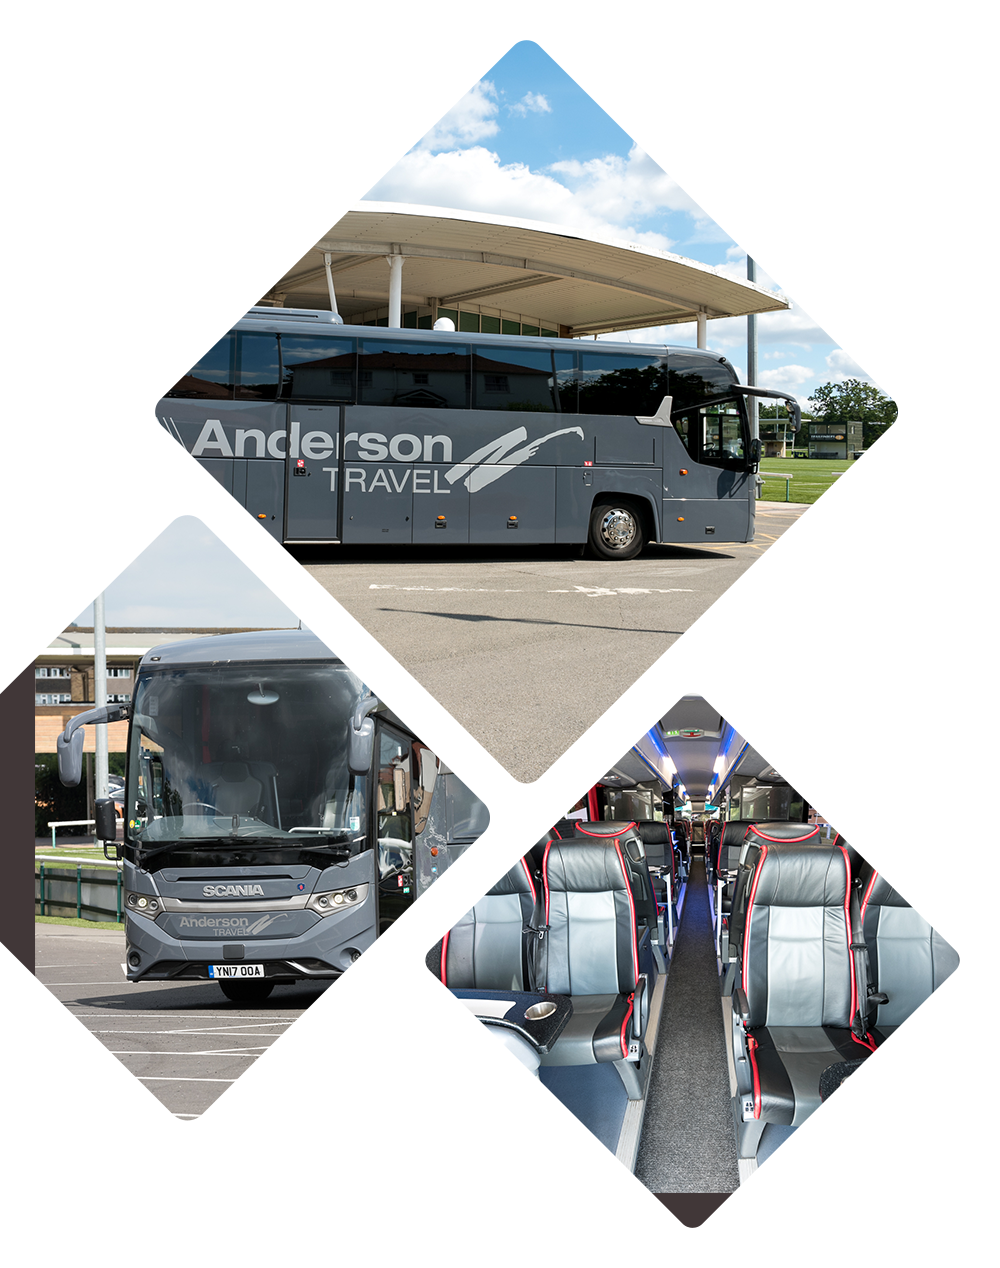 Sports travel by coach Anderson Travel, London